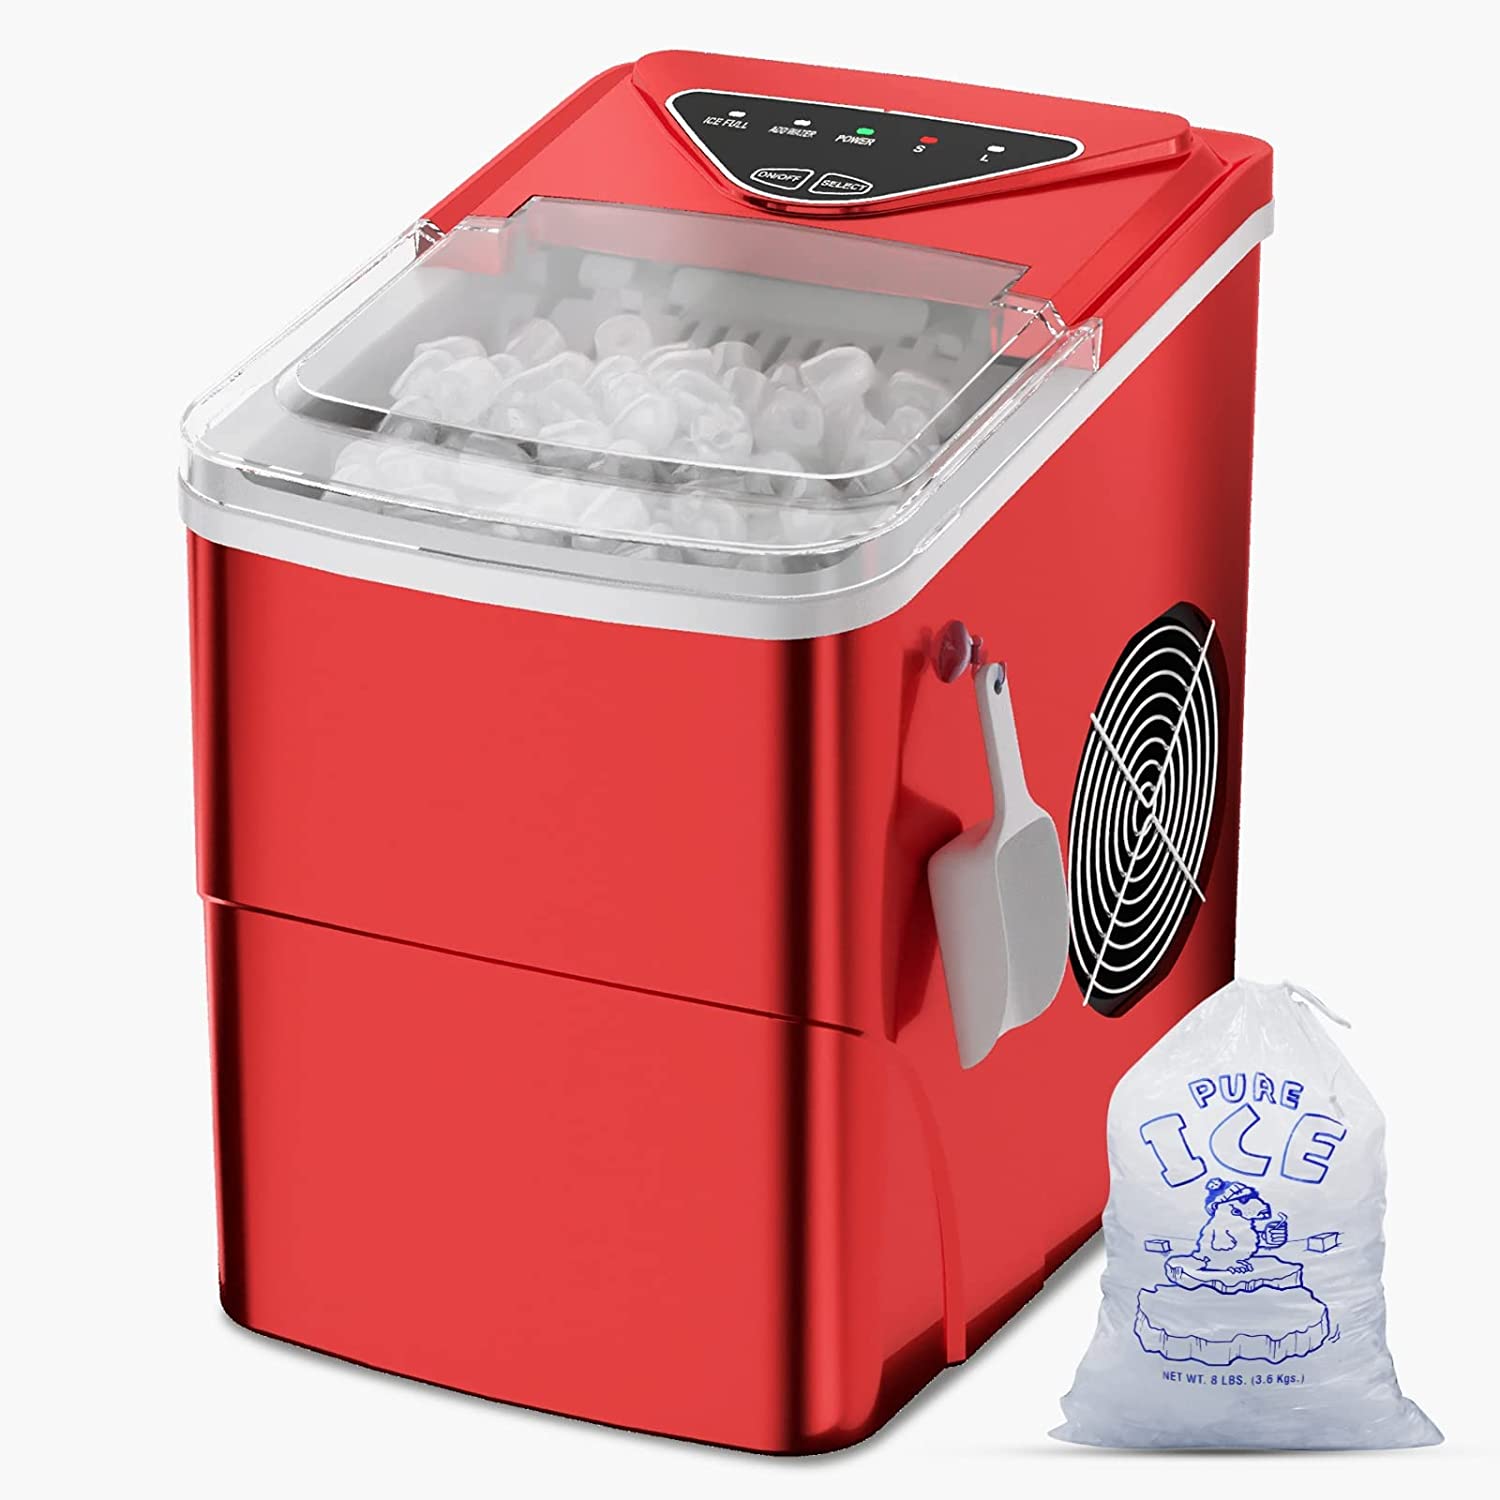 Ice Makers Countertop, Self-Cleaning Function, Portable Electric 9 Pebble Ice Ready in 6 Mins, 26lbs 24Hrs w/ Ice Bags & Ice Scoop Basket(Red)